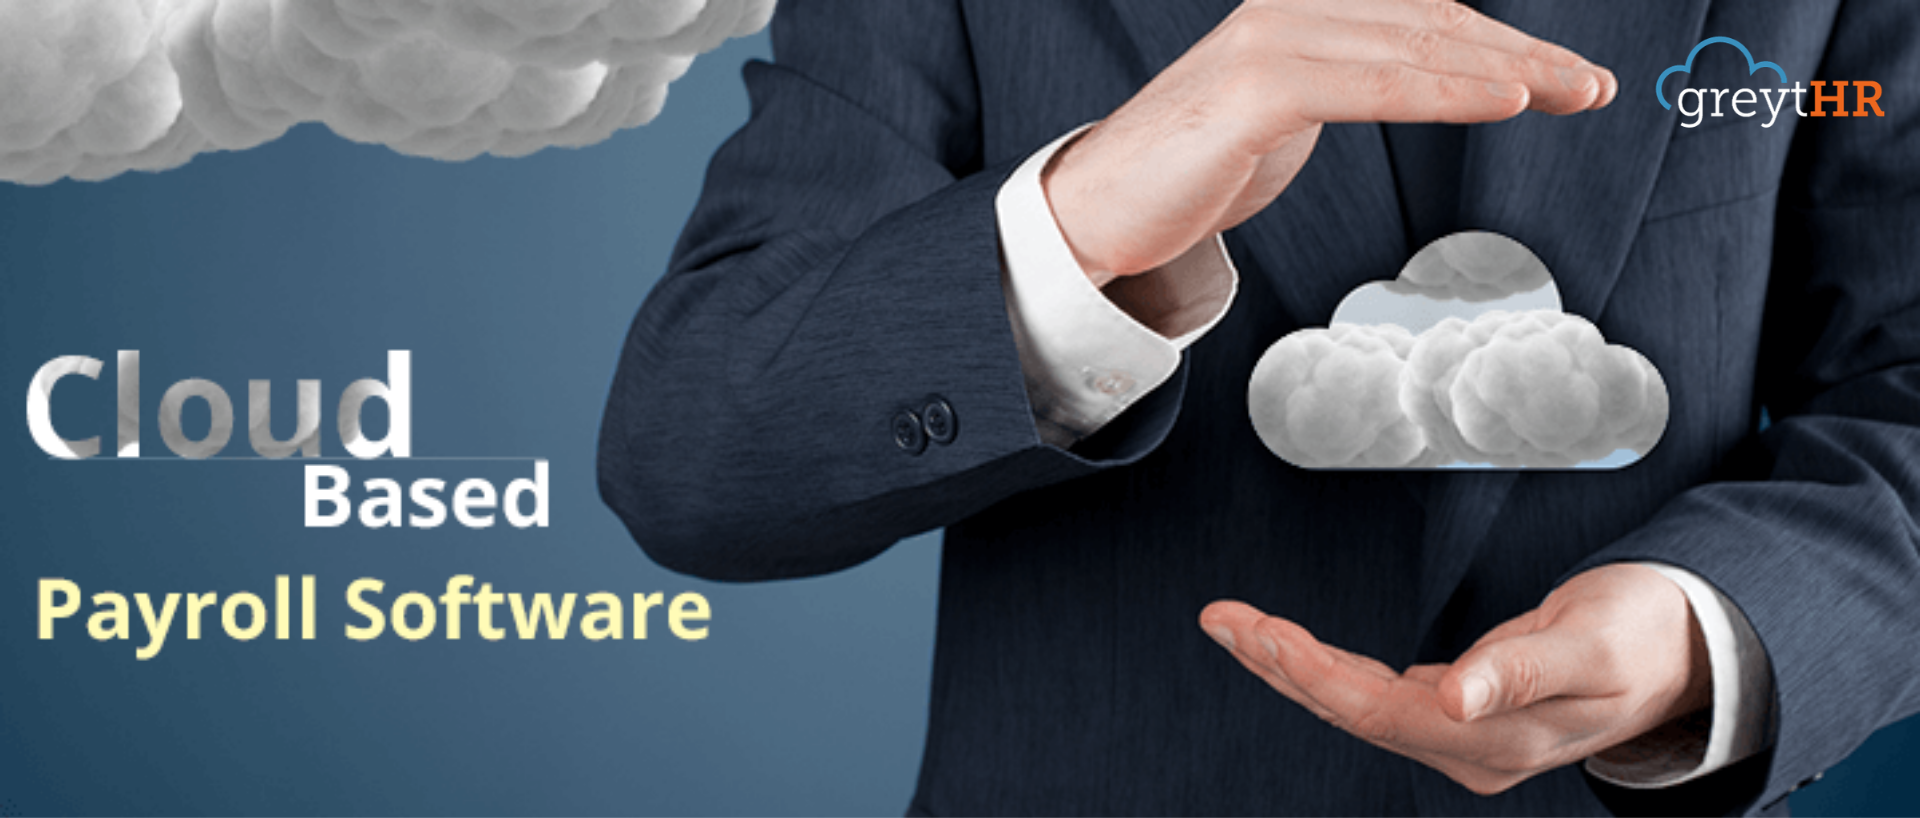 5 Reasons to Switch to a Cloud-Based Payroll Software